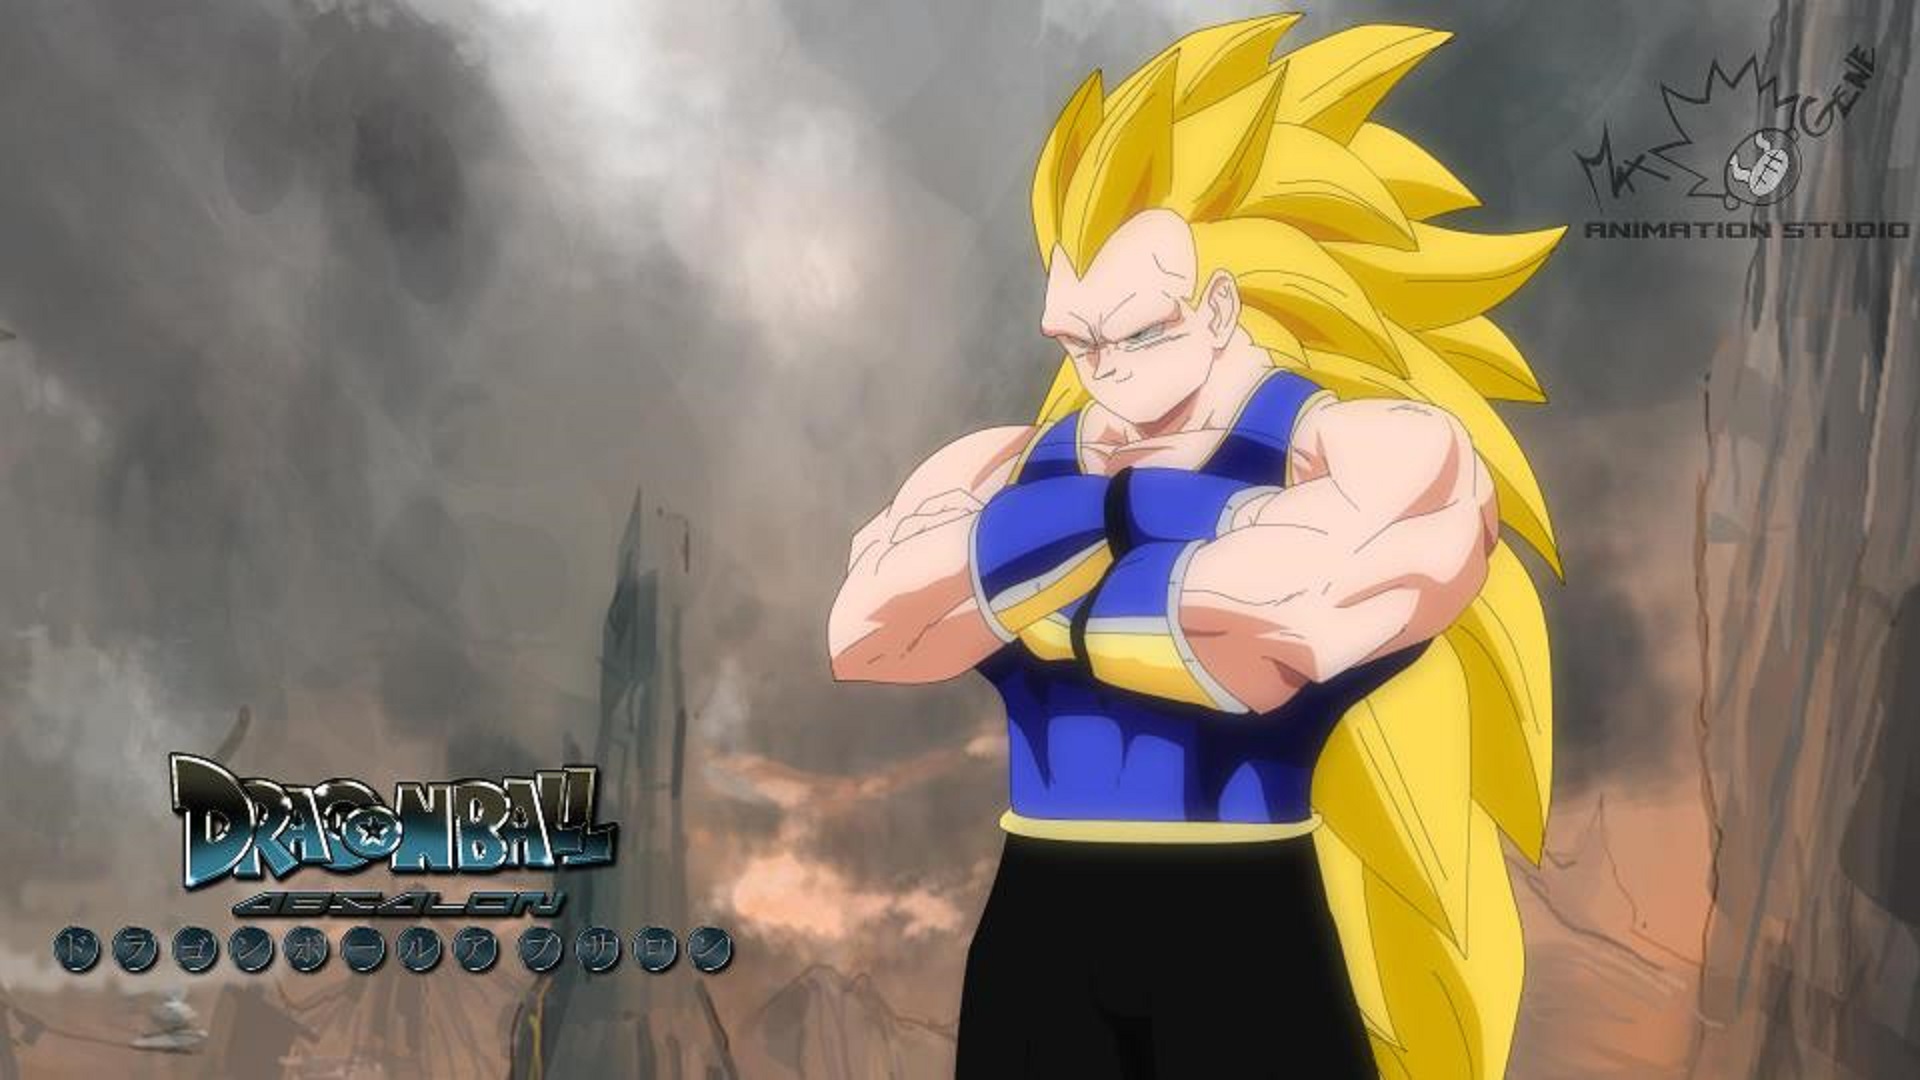 abed alarab recommends dragonball absalon episode 6 pic